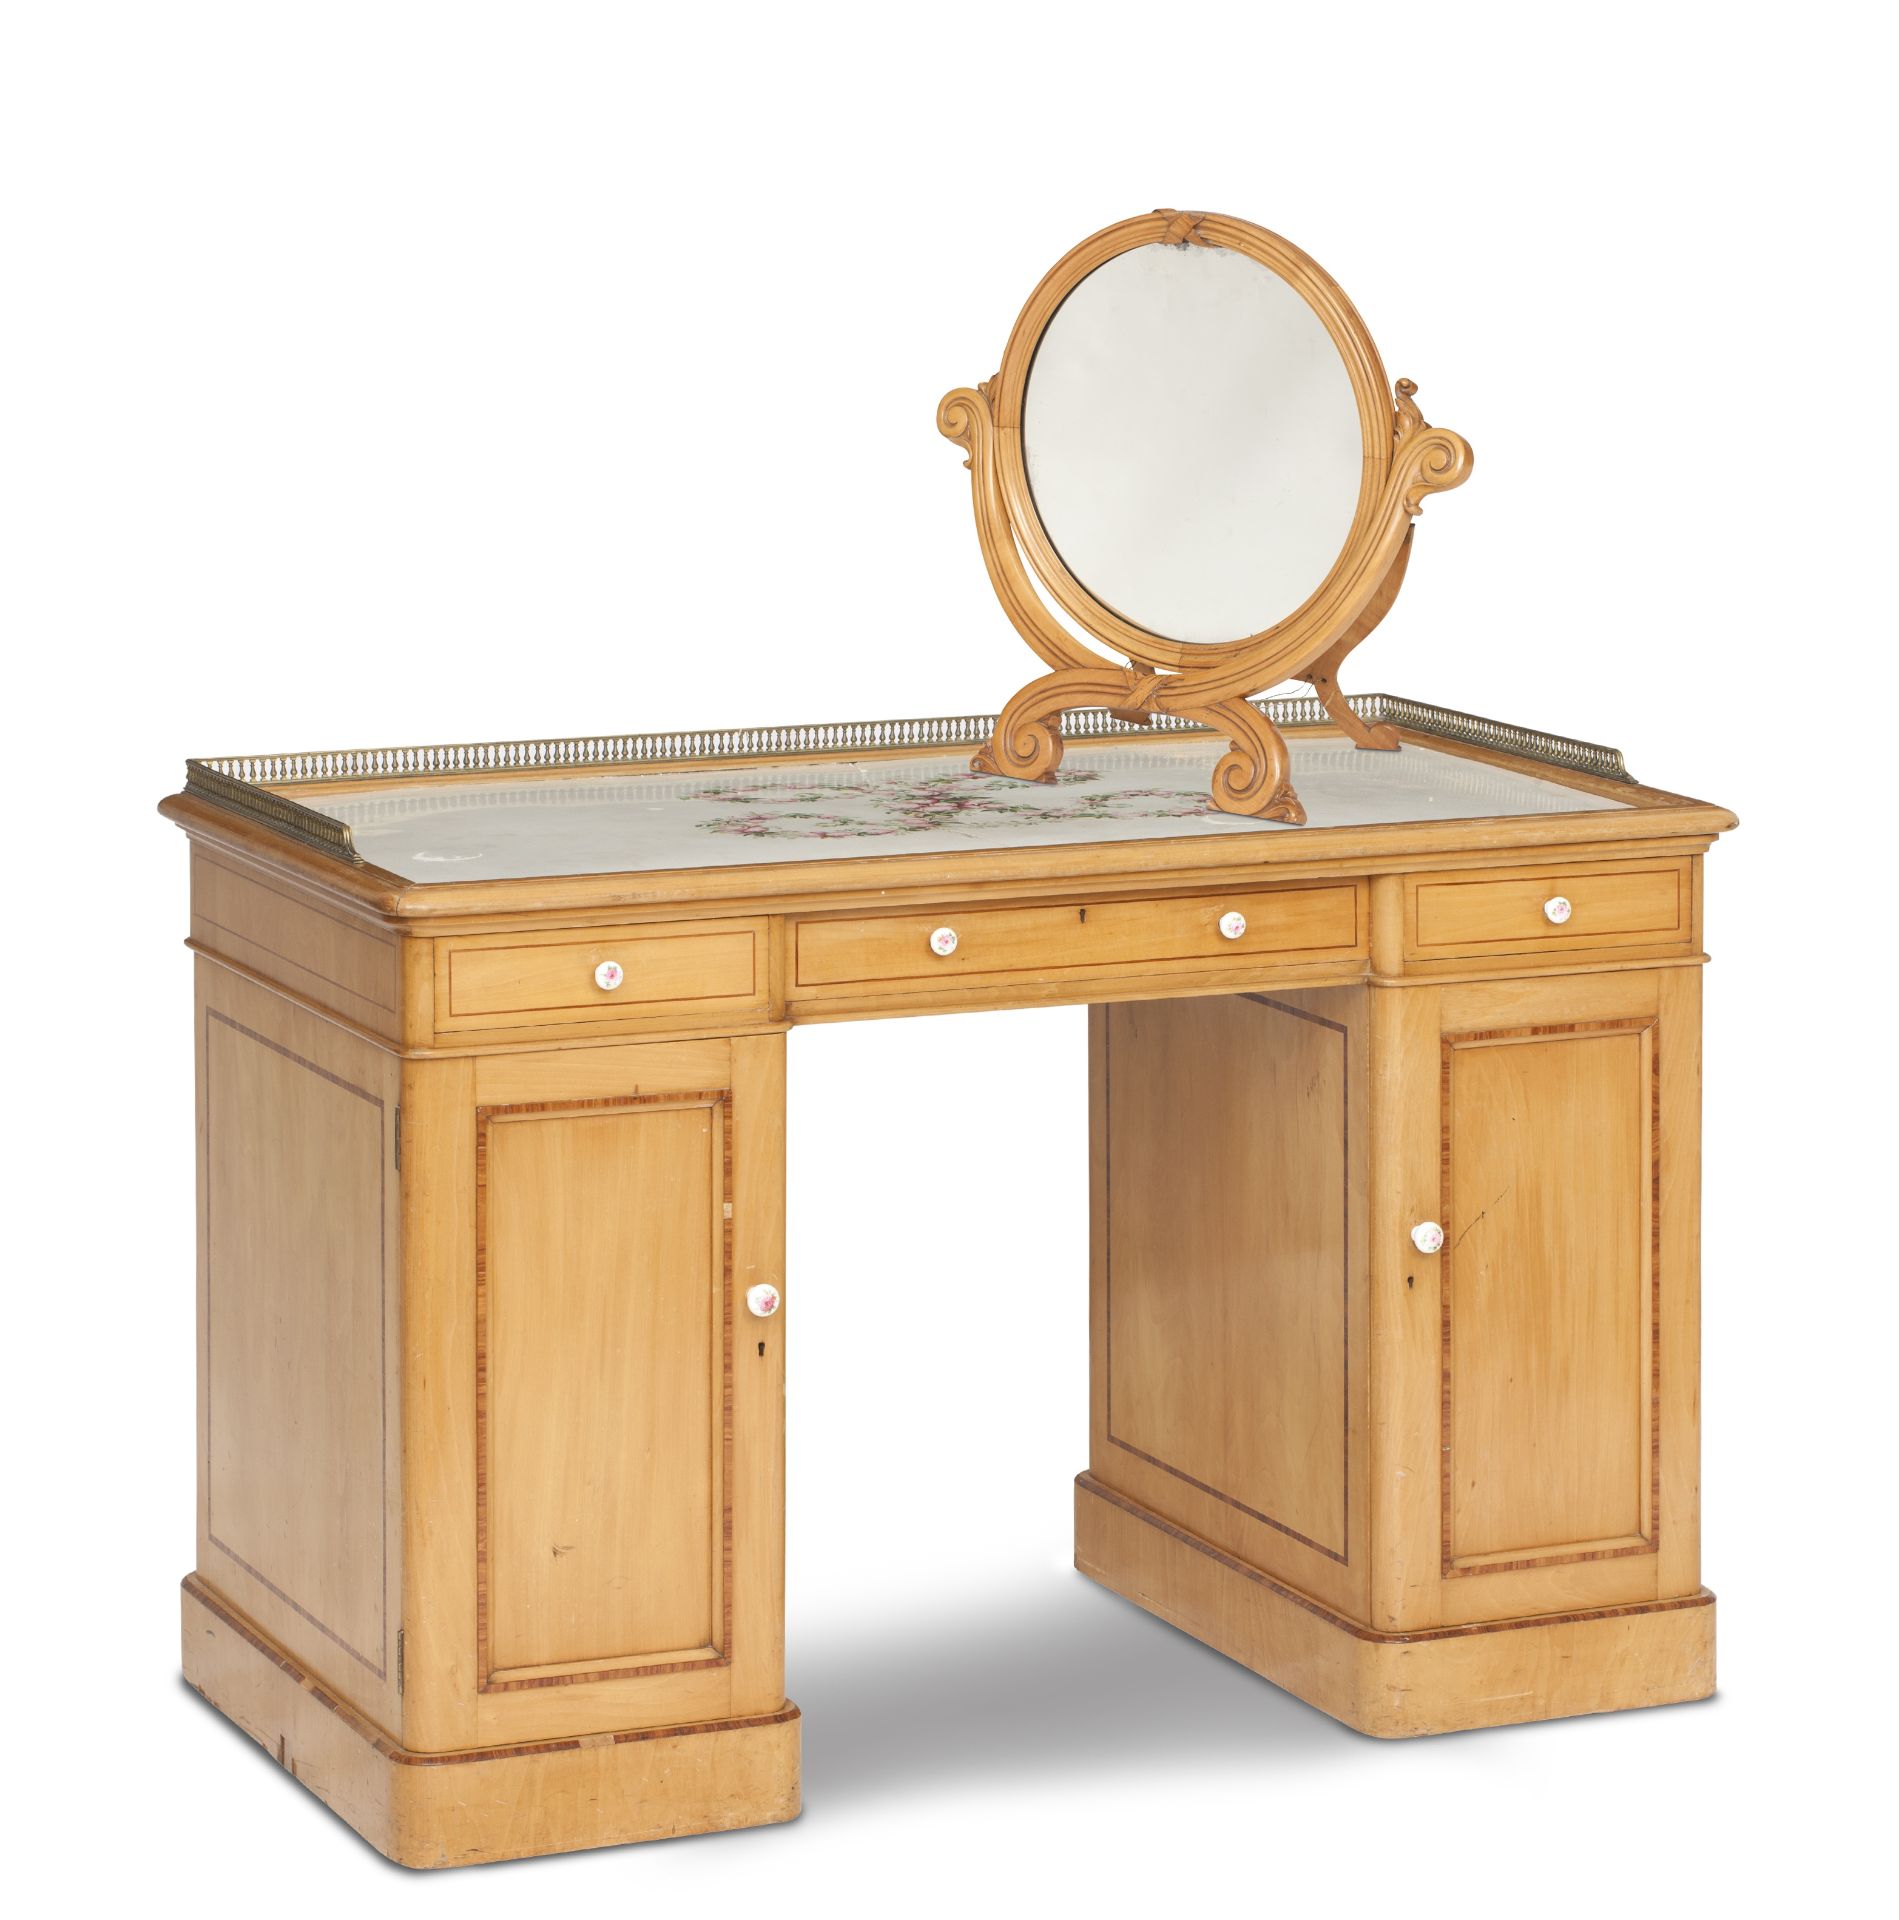 A late Victorian satinbirch dressing table